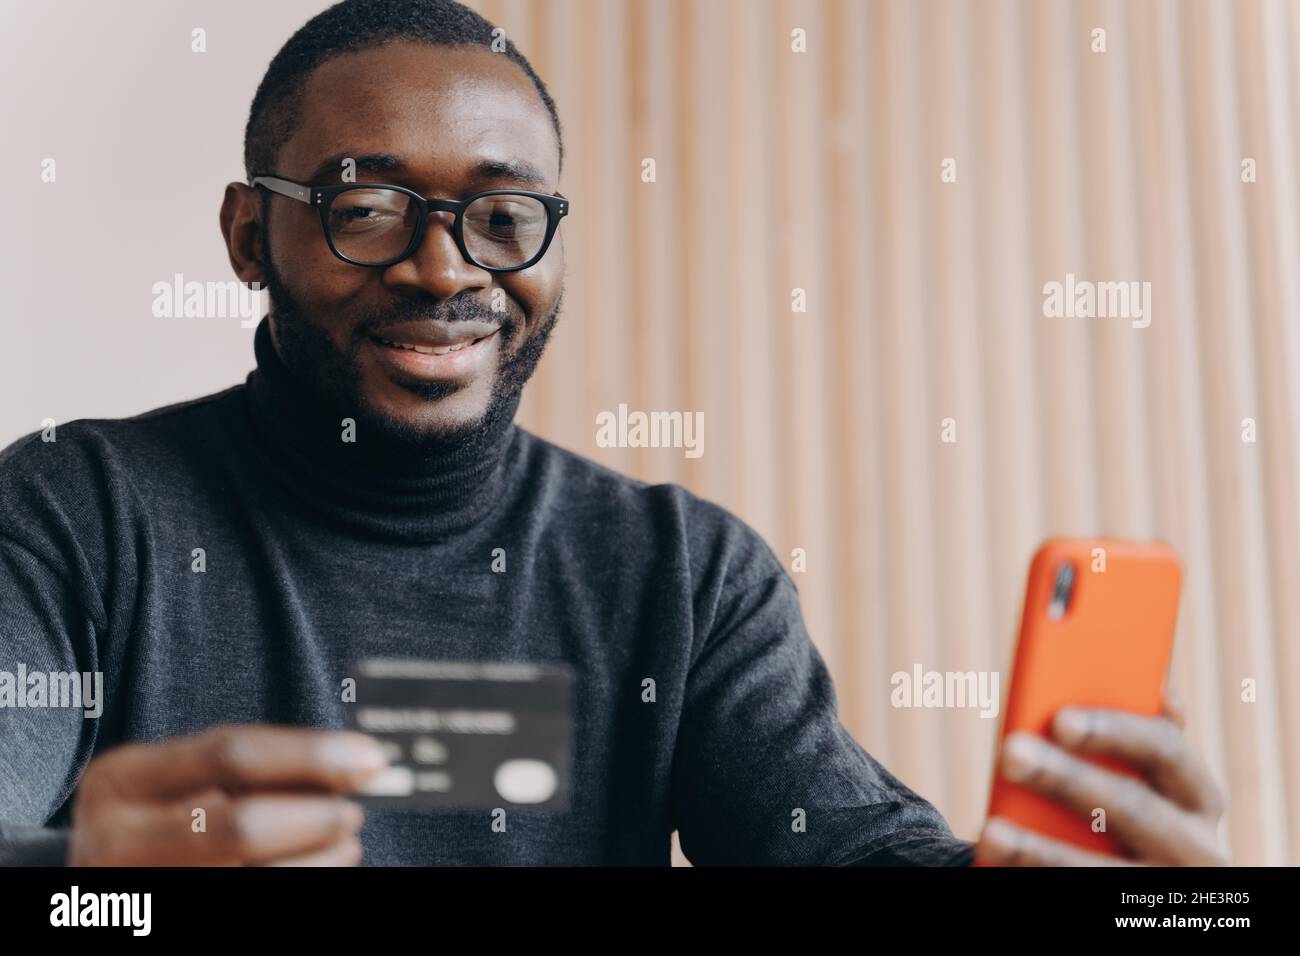 Young positive African ethnicity man entrepreneur in glasses paying with credit card online Stock Photo